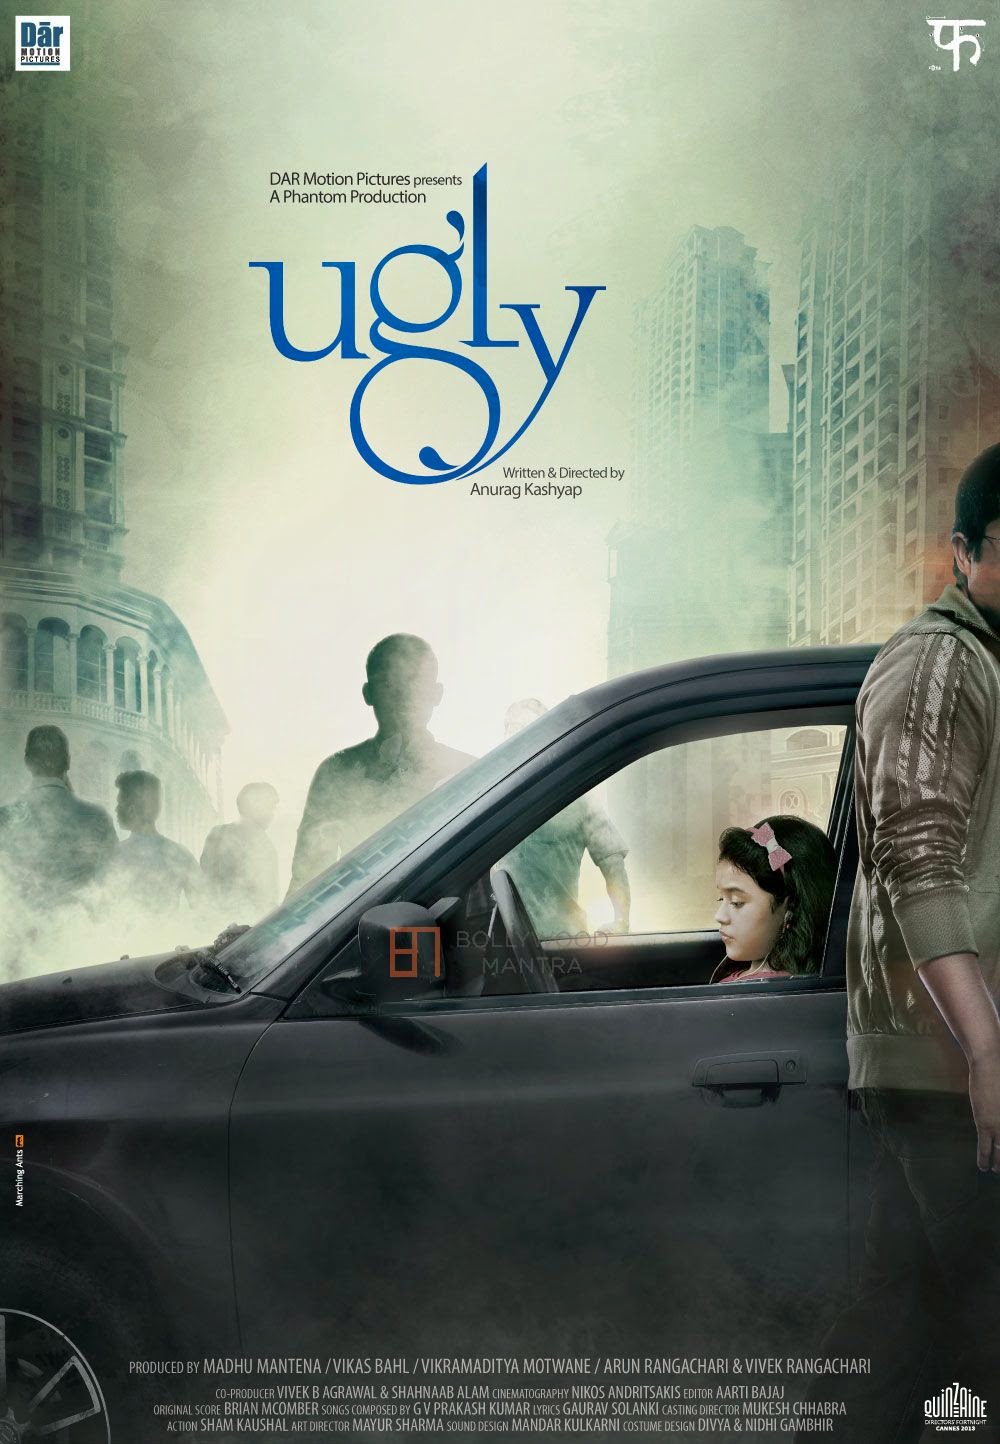 Ugly Bollywood Movie Review